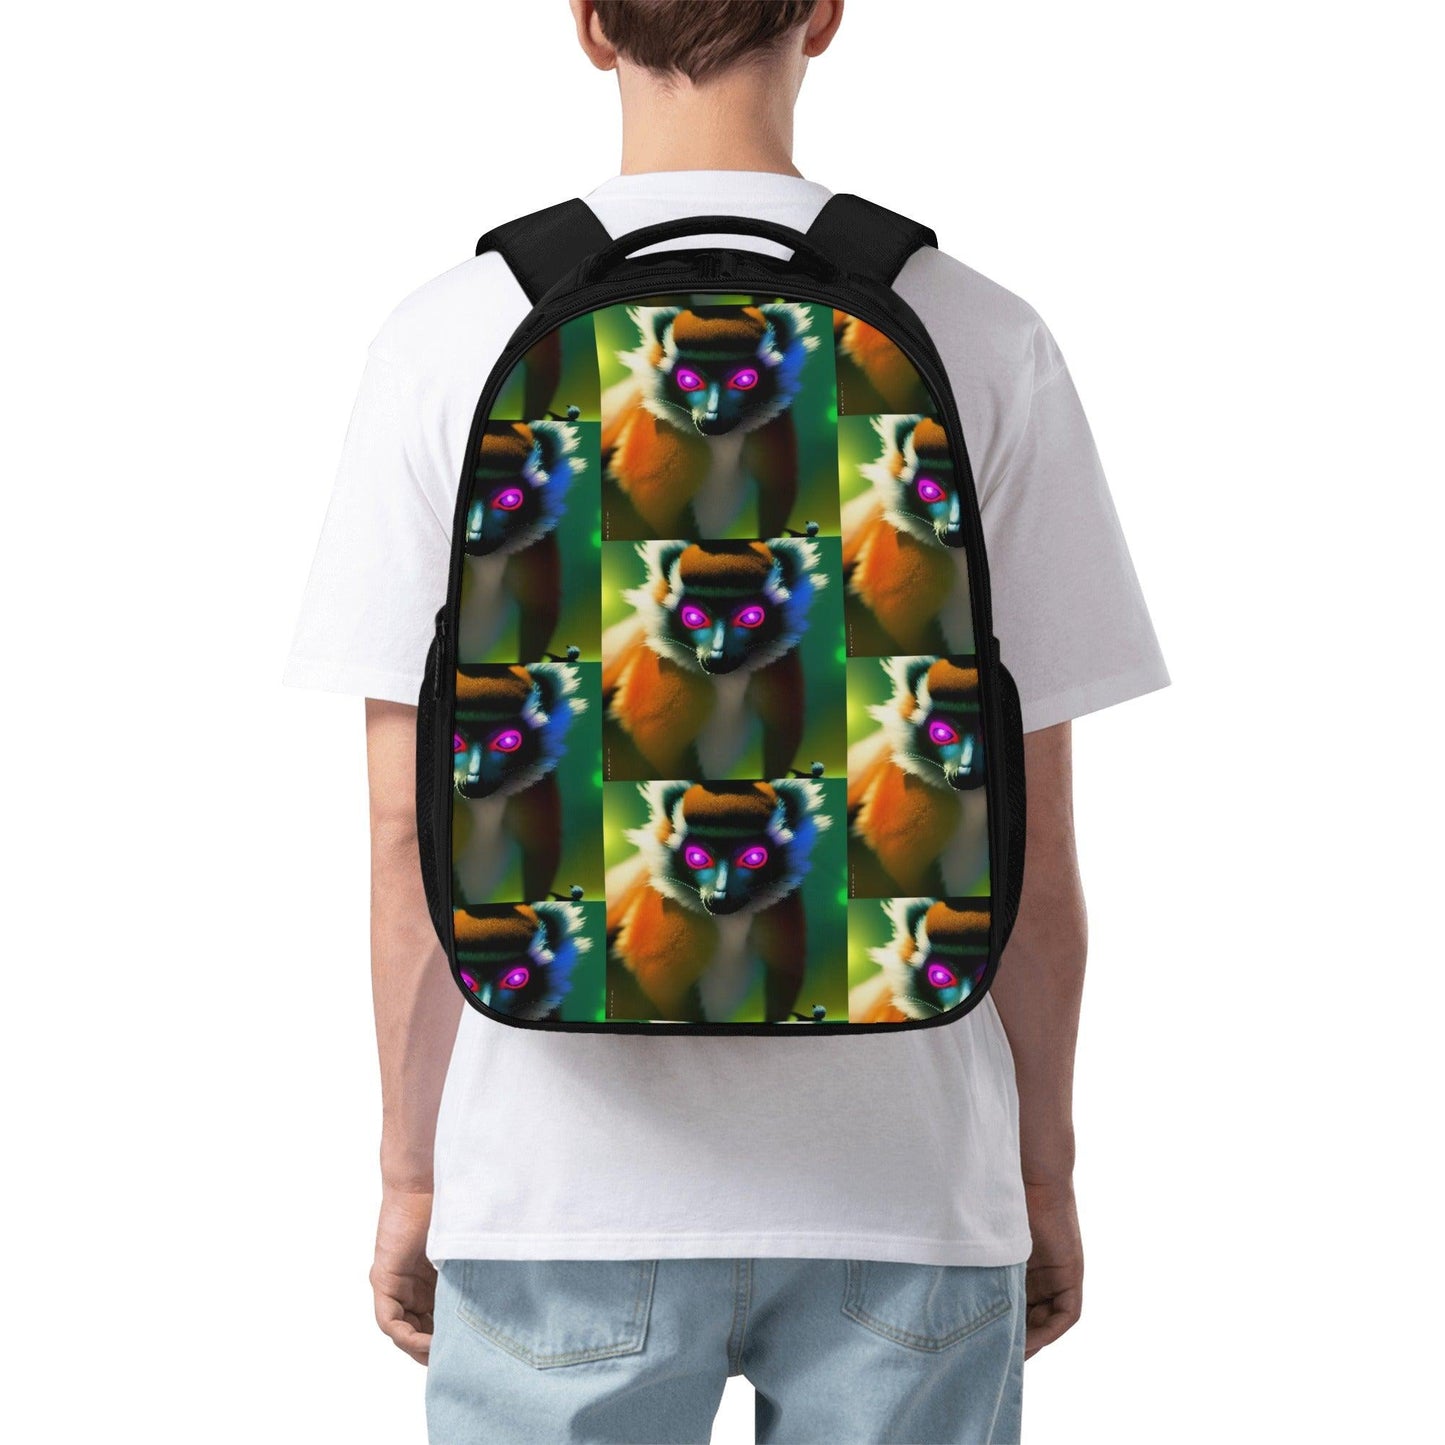 Glowing Eyes Pattern Dual Compartment School Backpack - GoAyeAye